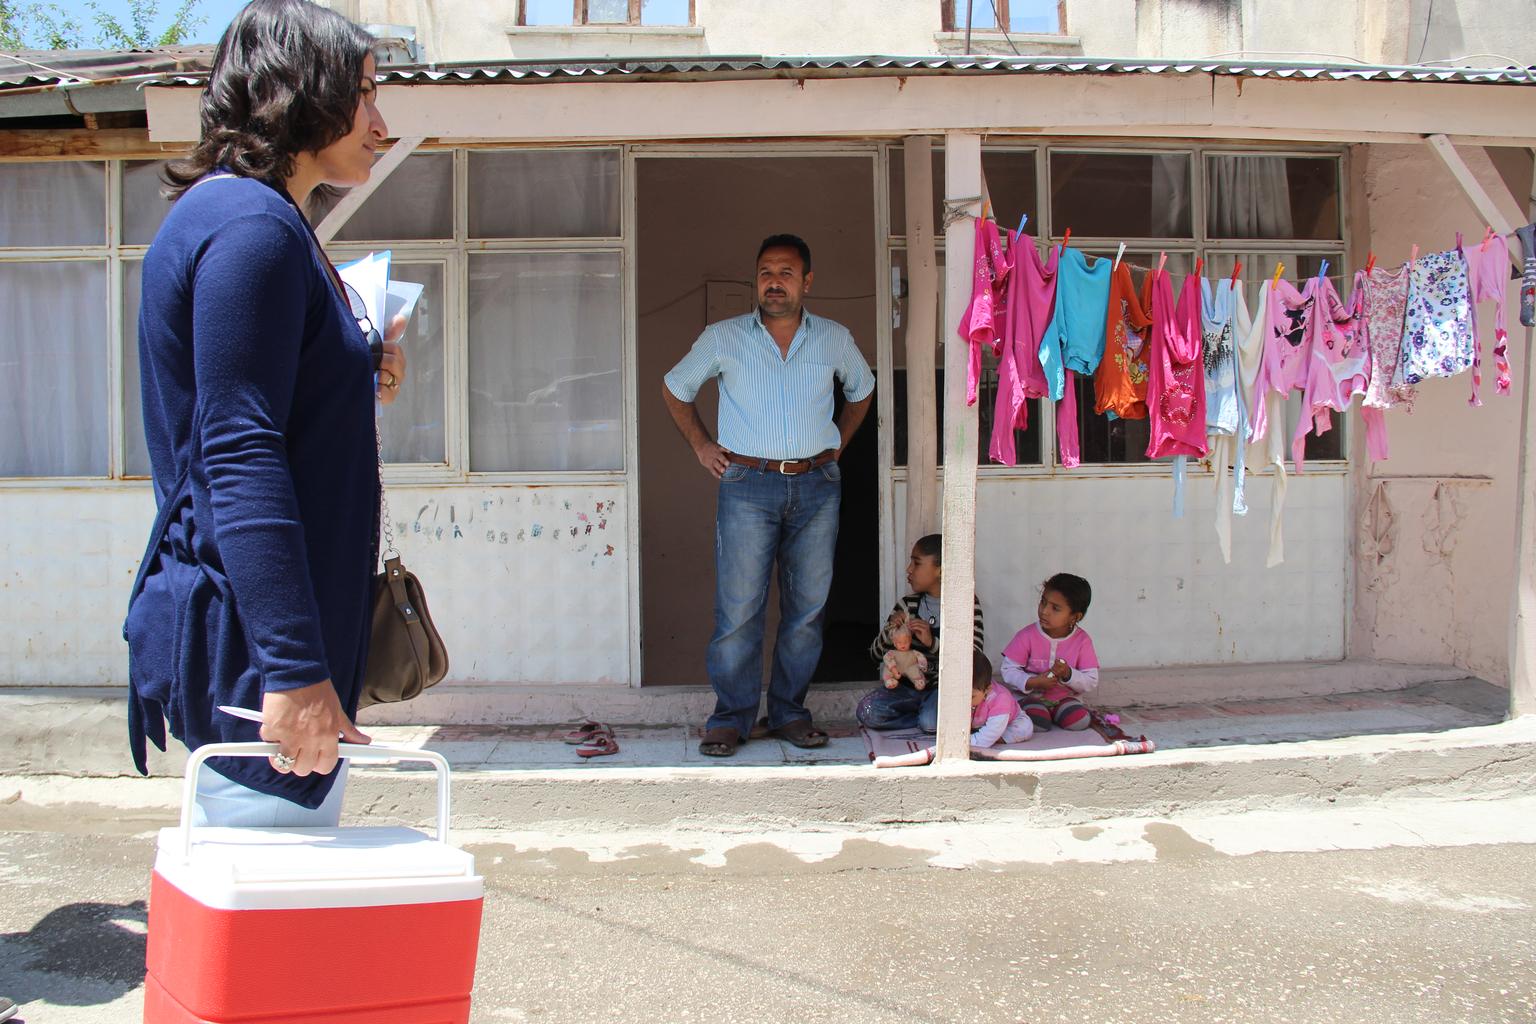 Turkish Ministry of Health workers make house calls to invite parents, like this father of seven who fled violence in Aleppo, Syria, to the local health center, where children can be inoculated against polio. In nearby Syria, where polio outbreaks have oc